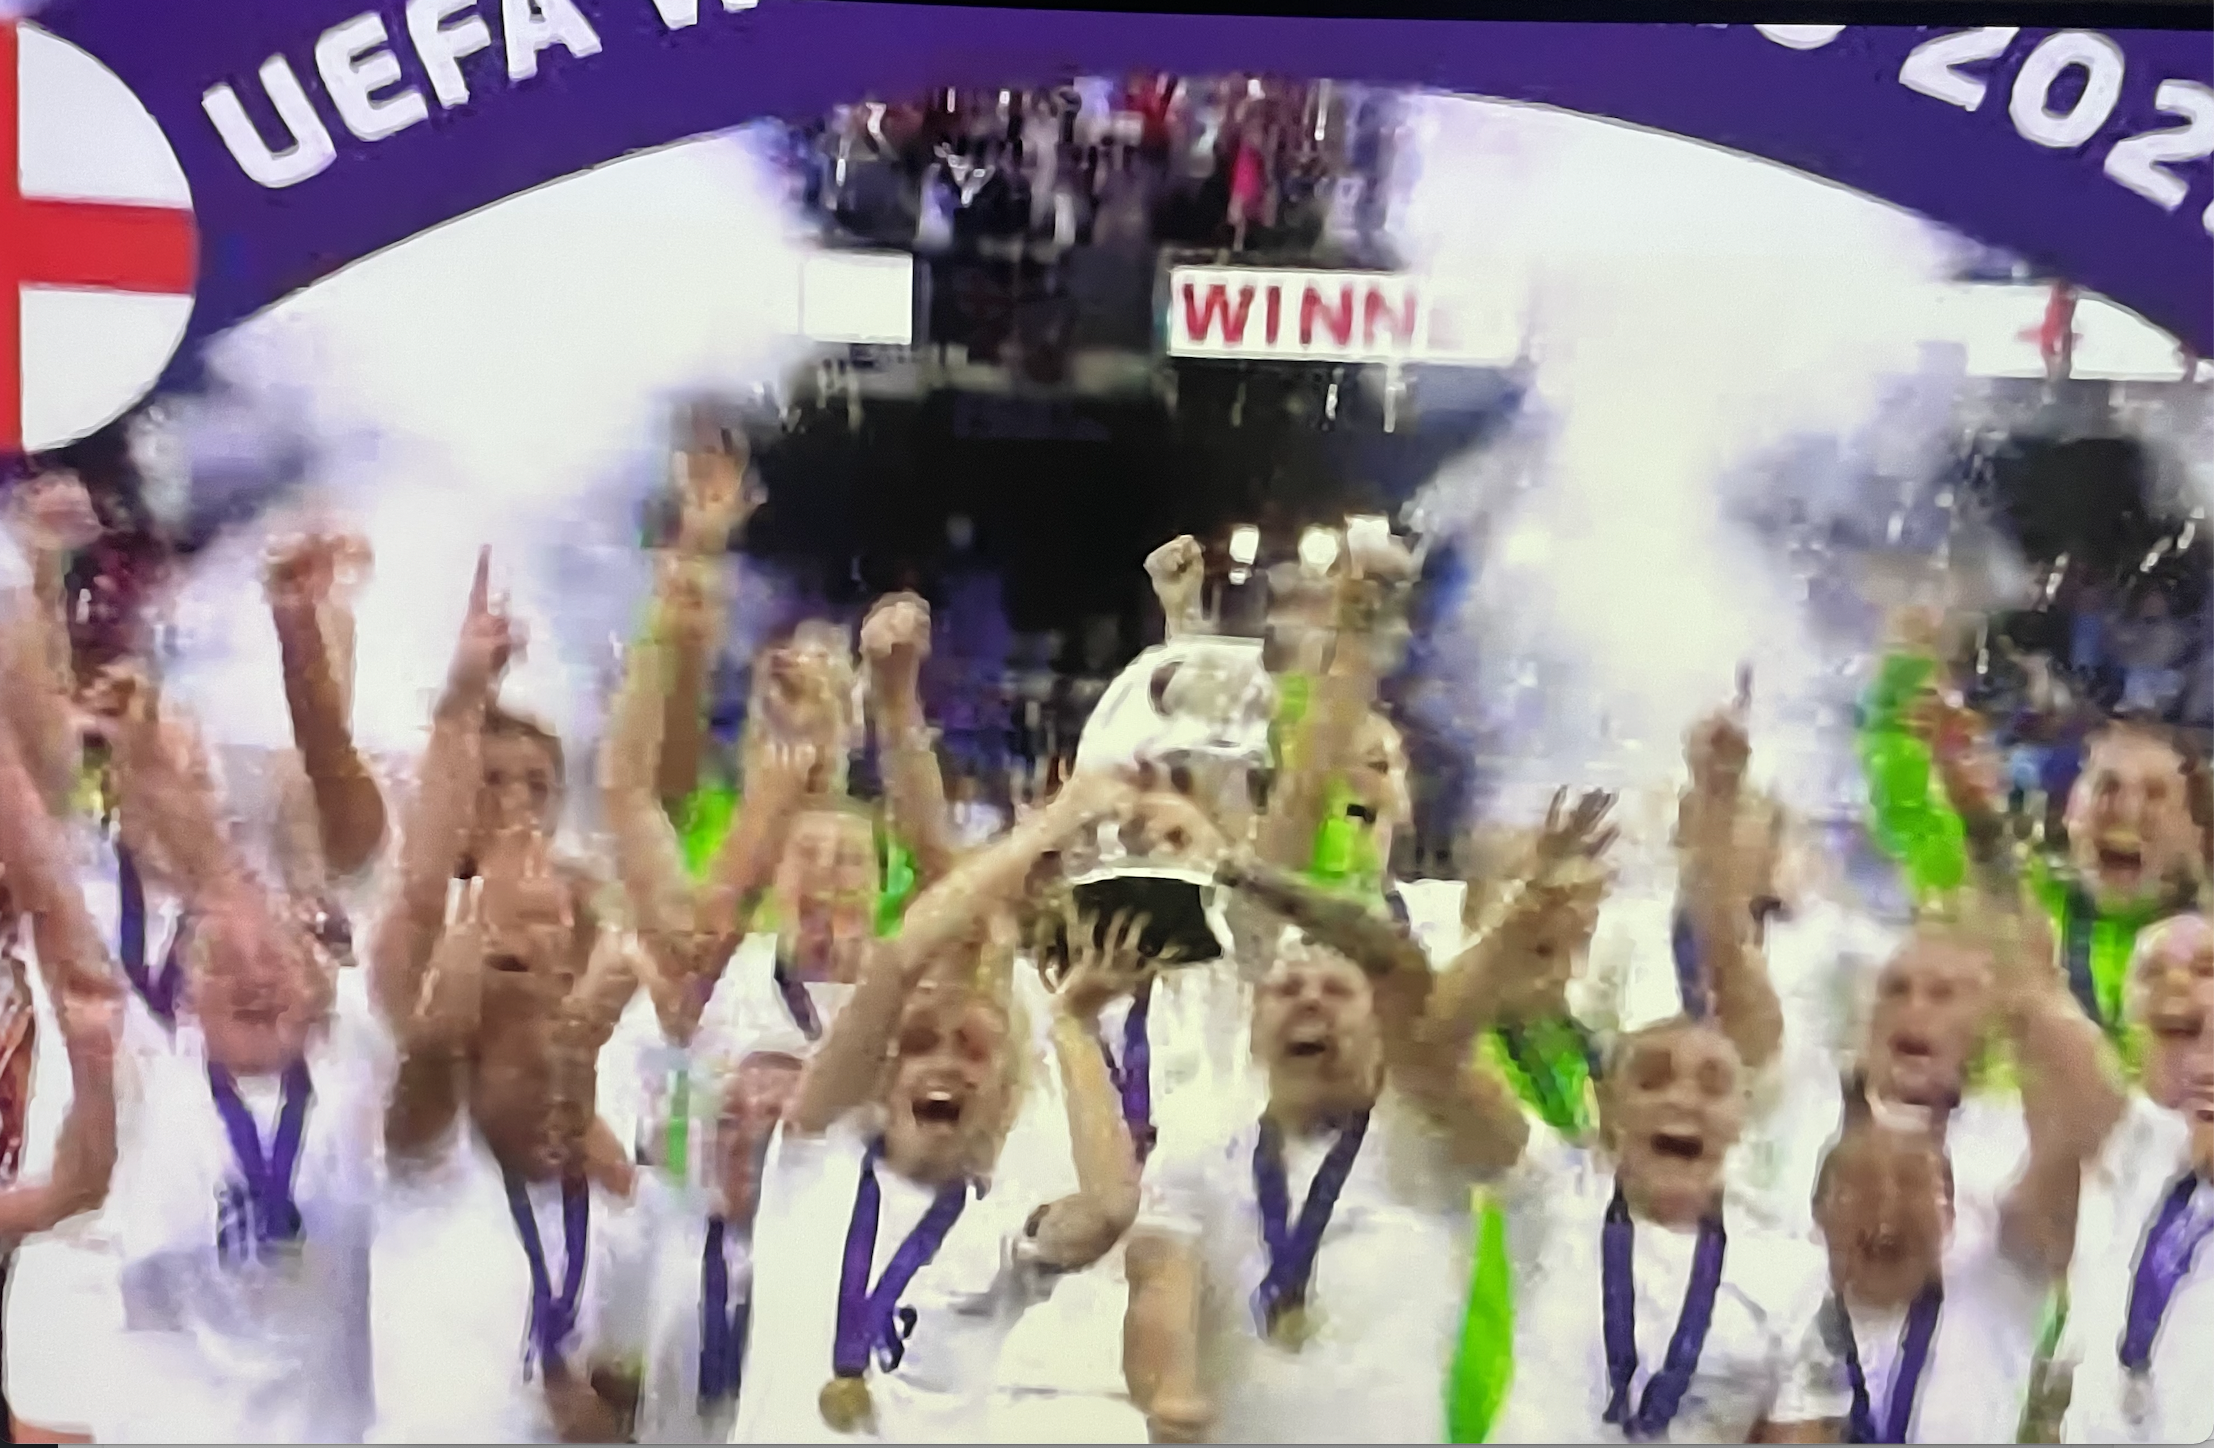 Lionesses lift the UEFA Euro 22 Women's Football trophy